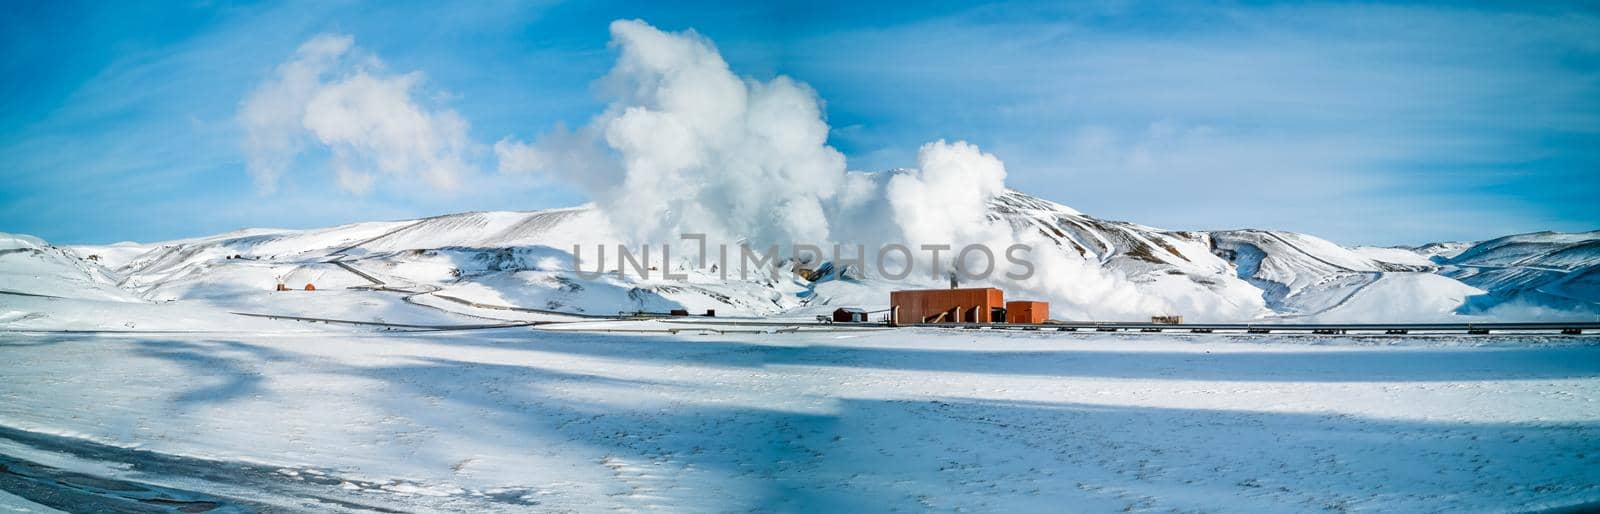 Geothermic energy plant over the snow, panorama by FerradalFCG